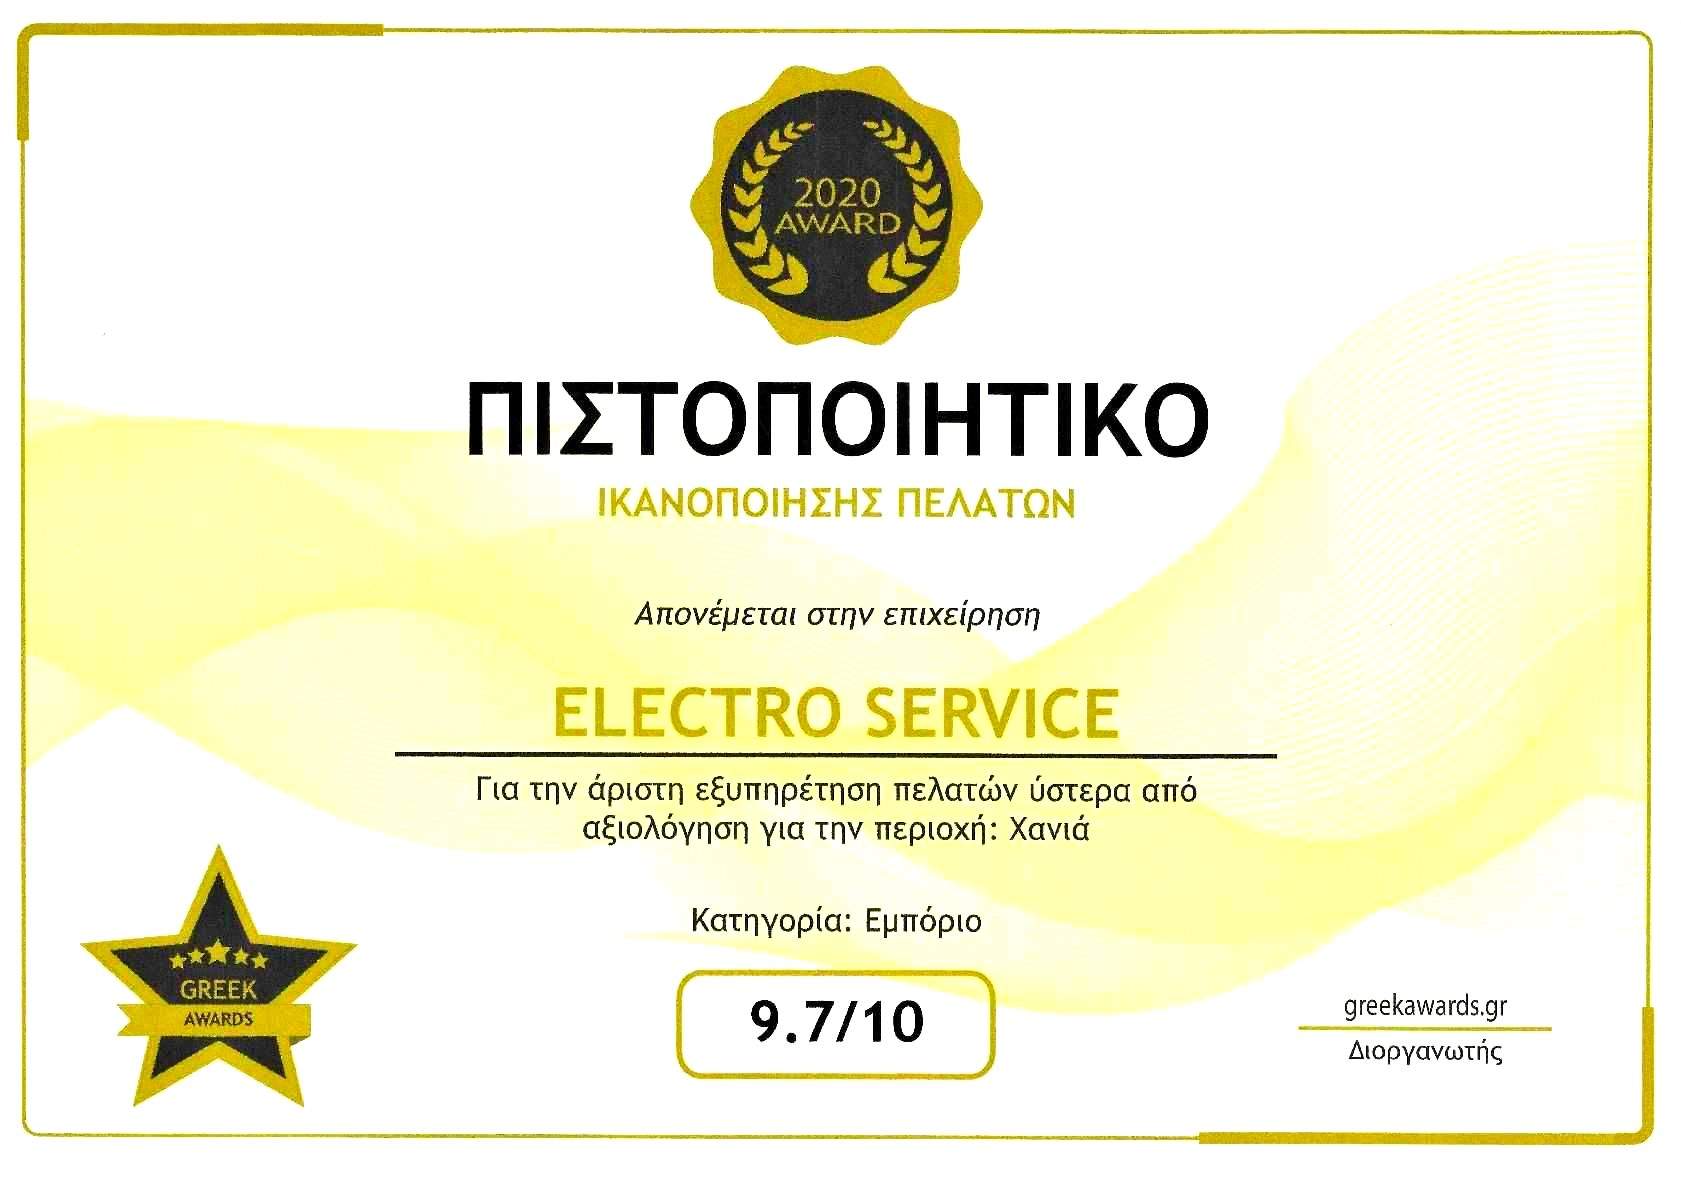 ELECTRO SERVICE | Repairs & Spare Parts of Household Electrical Appliances - Air Conditioners, Chania